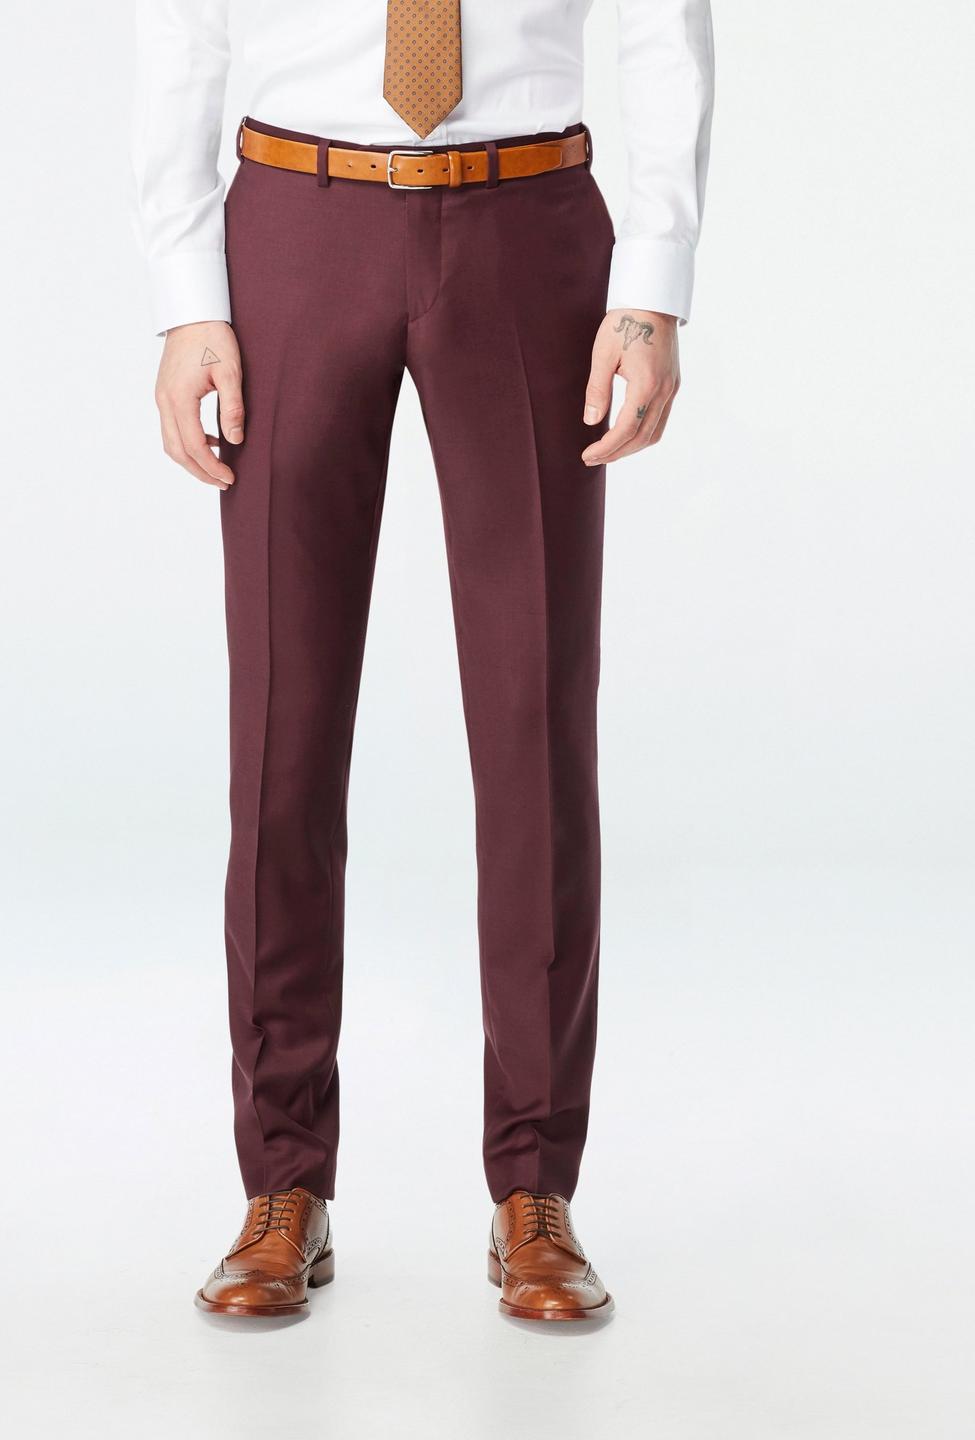 What Colors Go With Burgundy Pants | lupon.gov.ph